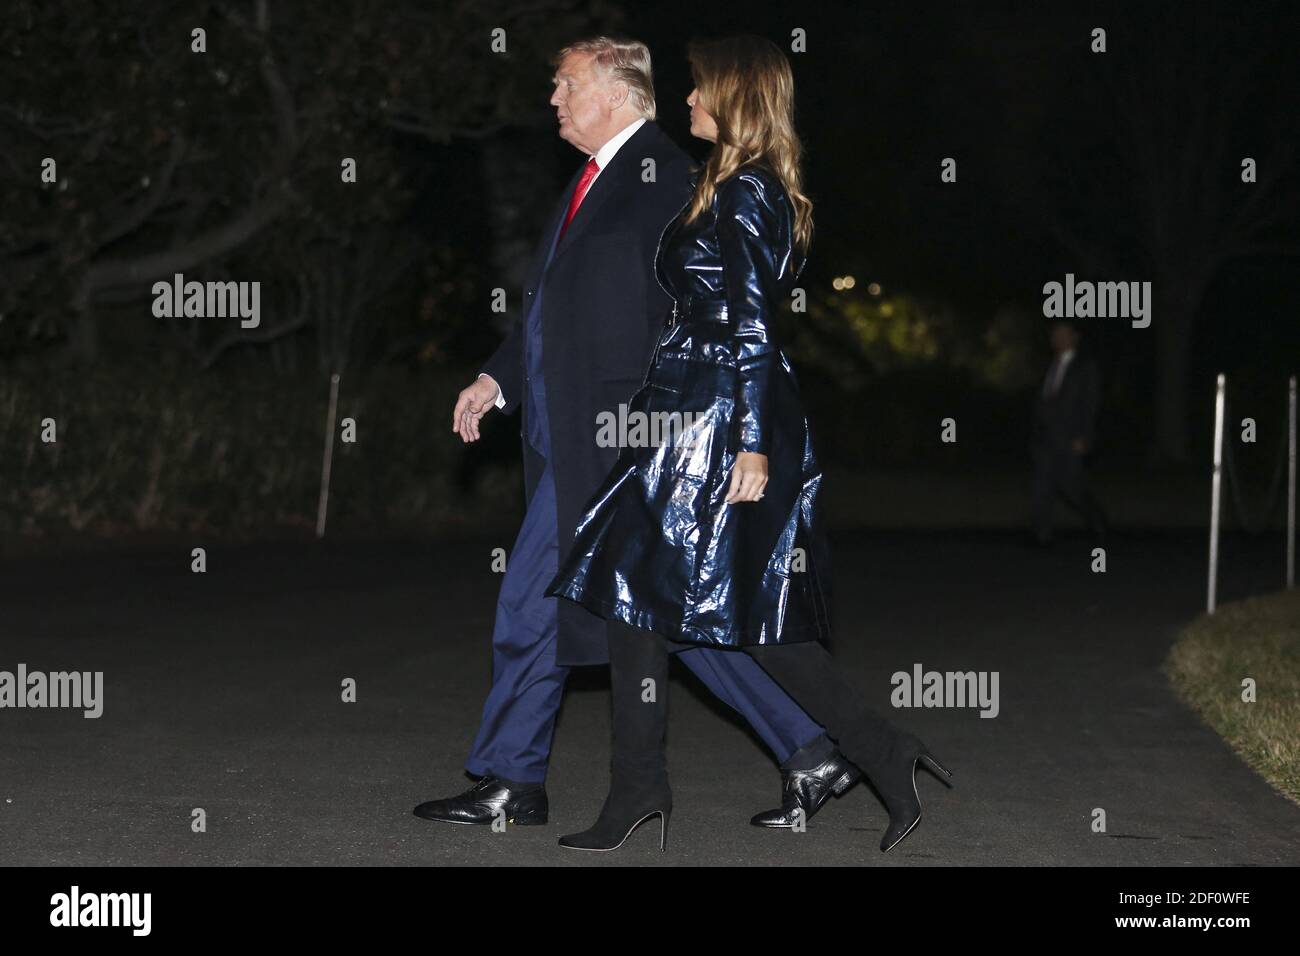 President Donald Trump and first lady Melania Trump walk on the South Lawn  as they arrive to the White House on January 14, 2020 in Washington, DC.  President Trump and first lady